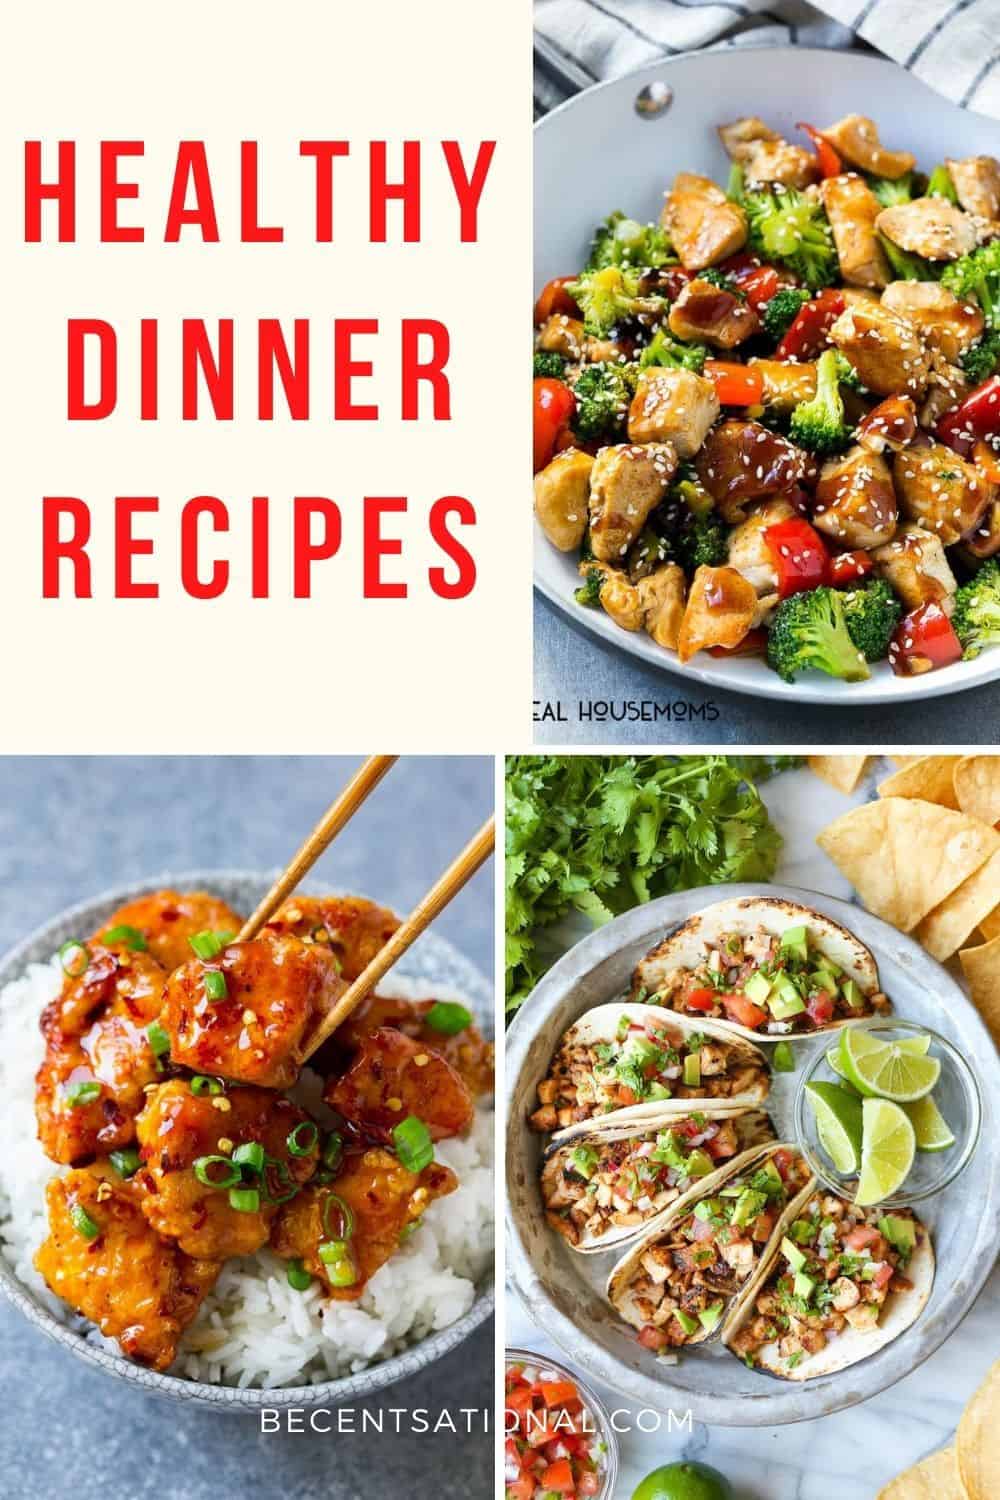 Healthy Dinner Recipes: 10 Easy Dinners- BeCentsational